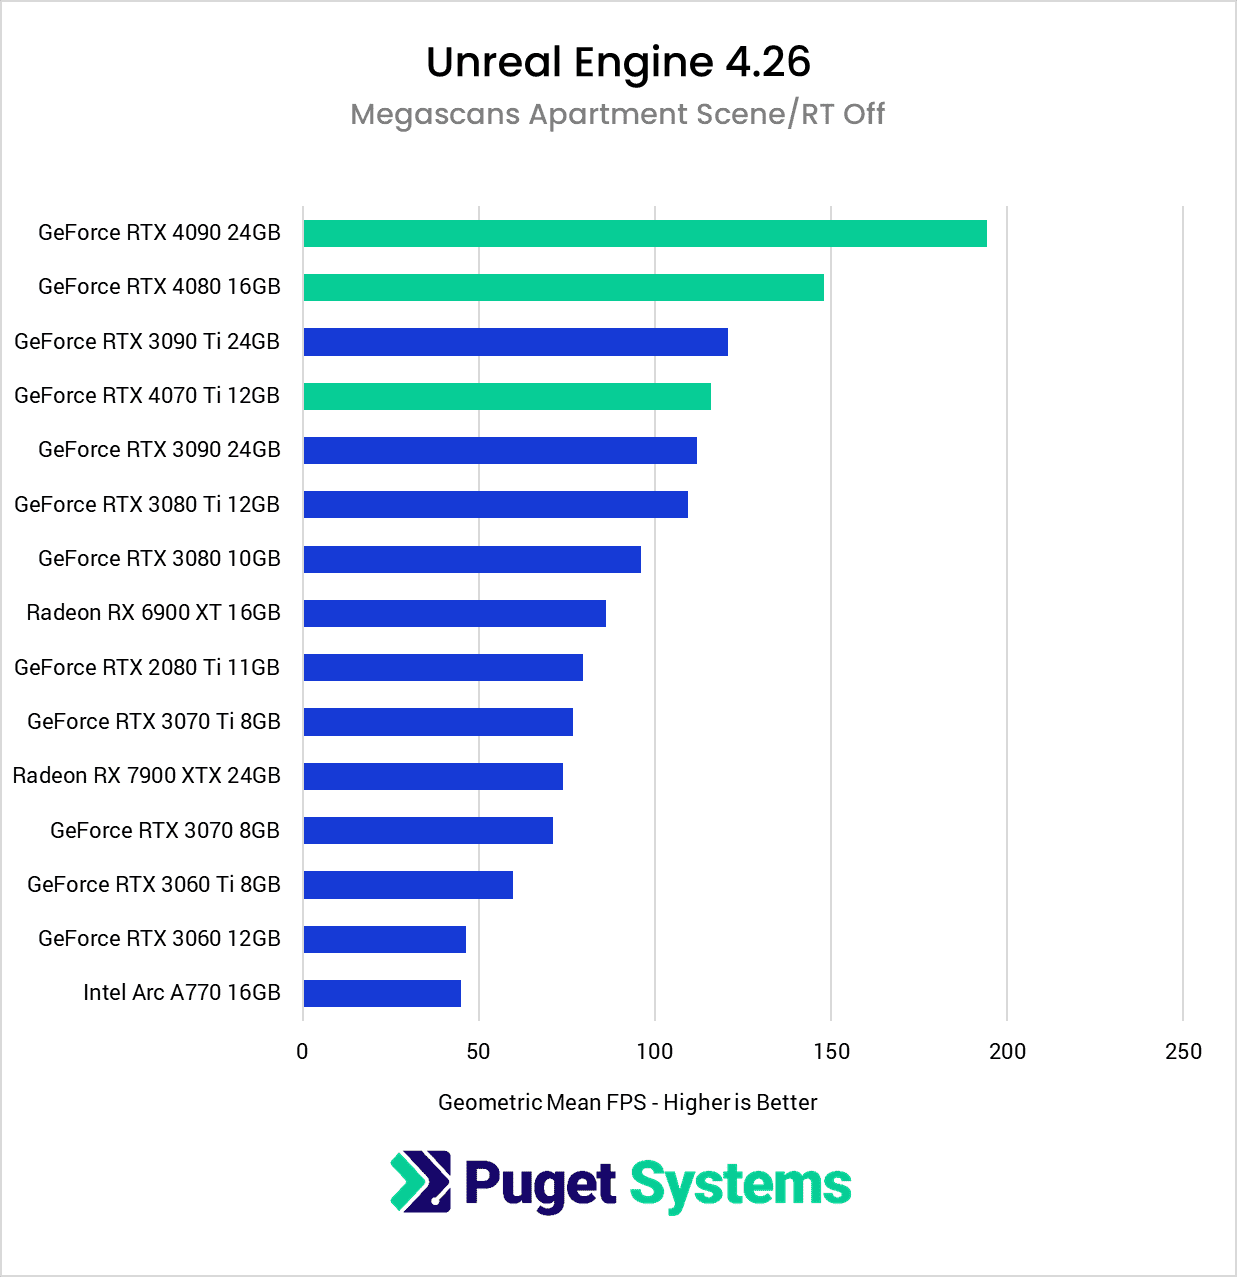 Chart showing Rasterized performance in Unreal Engine